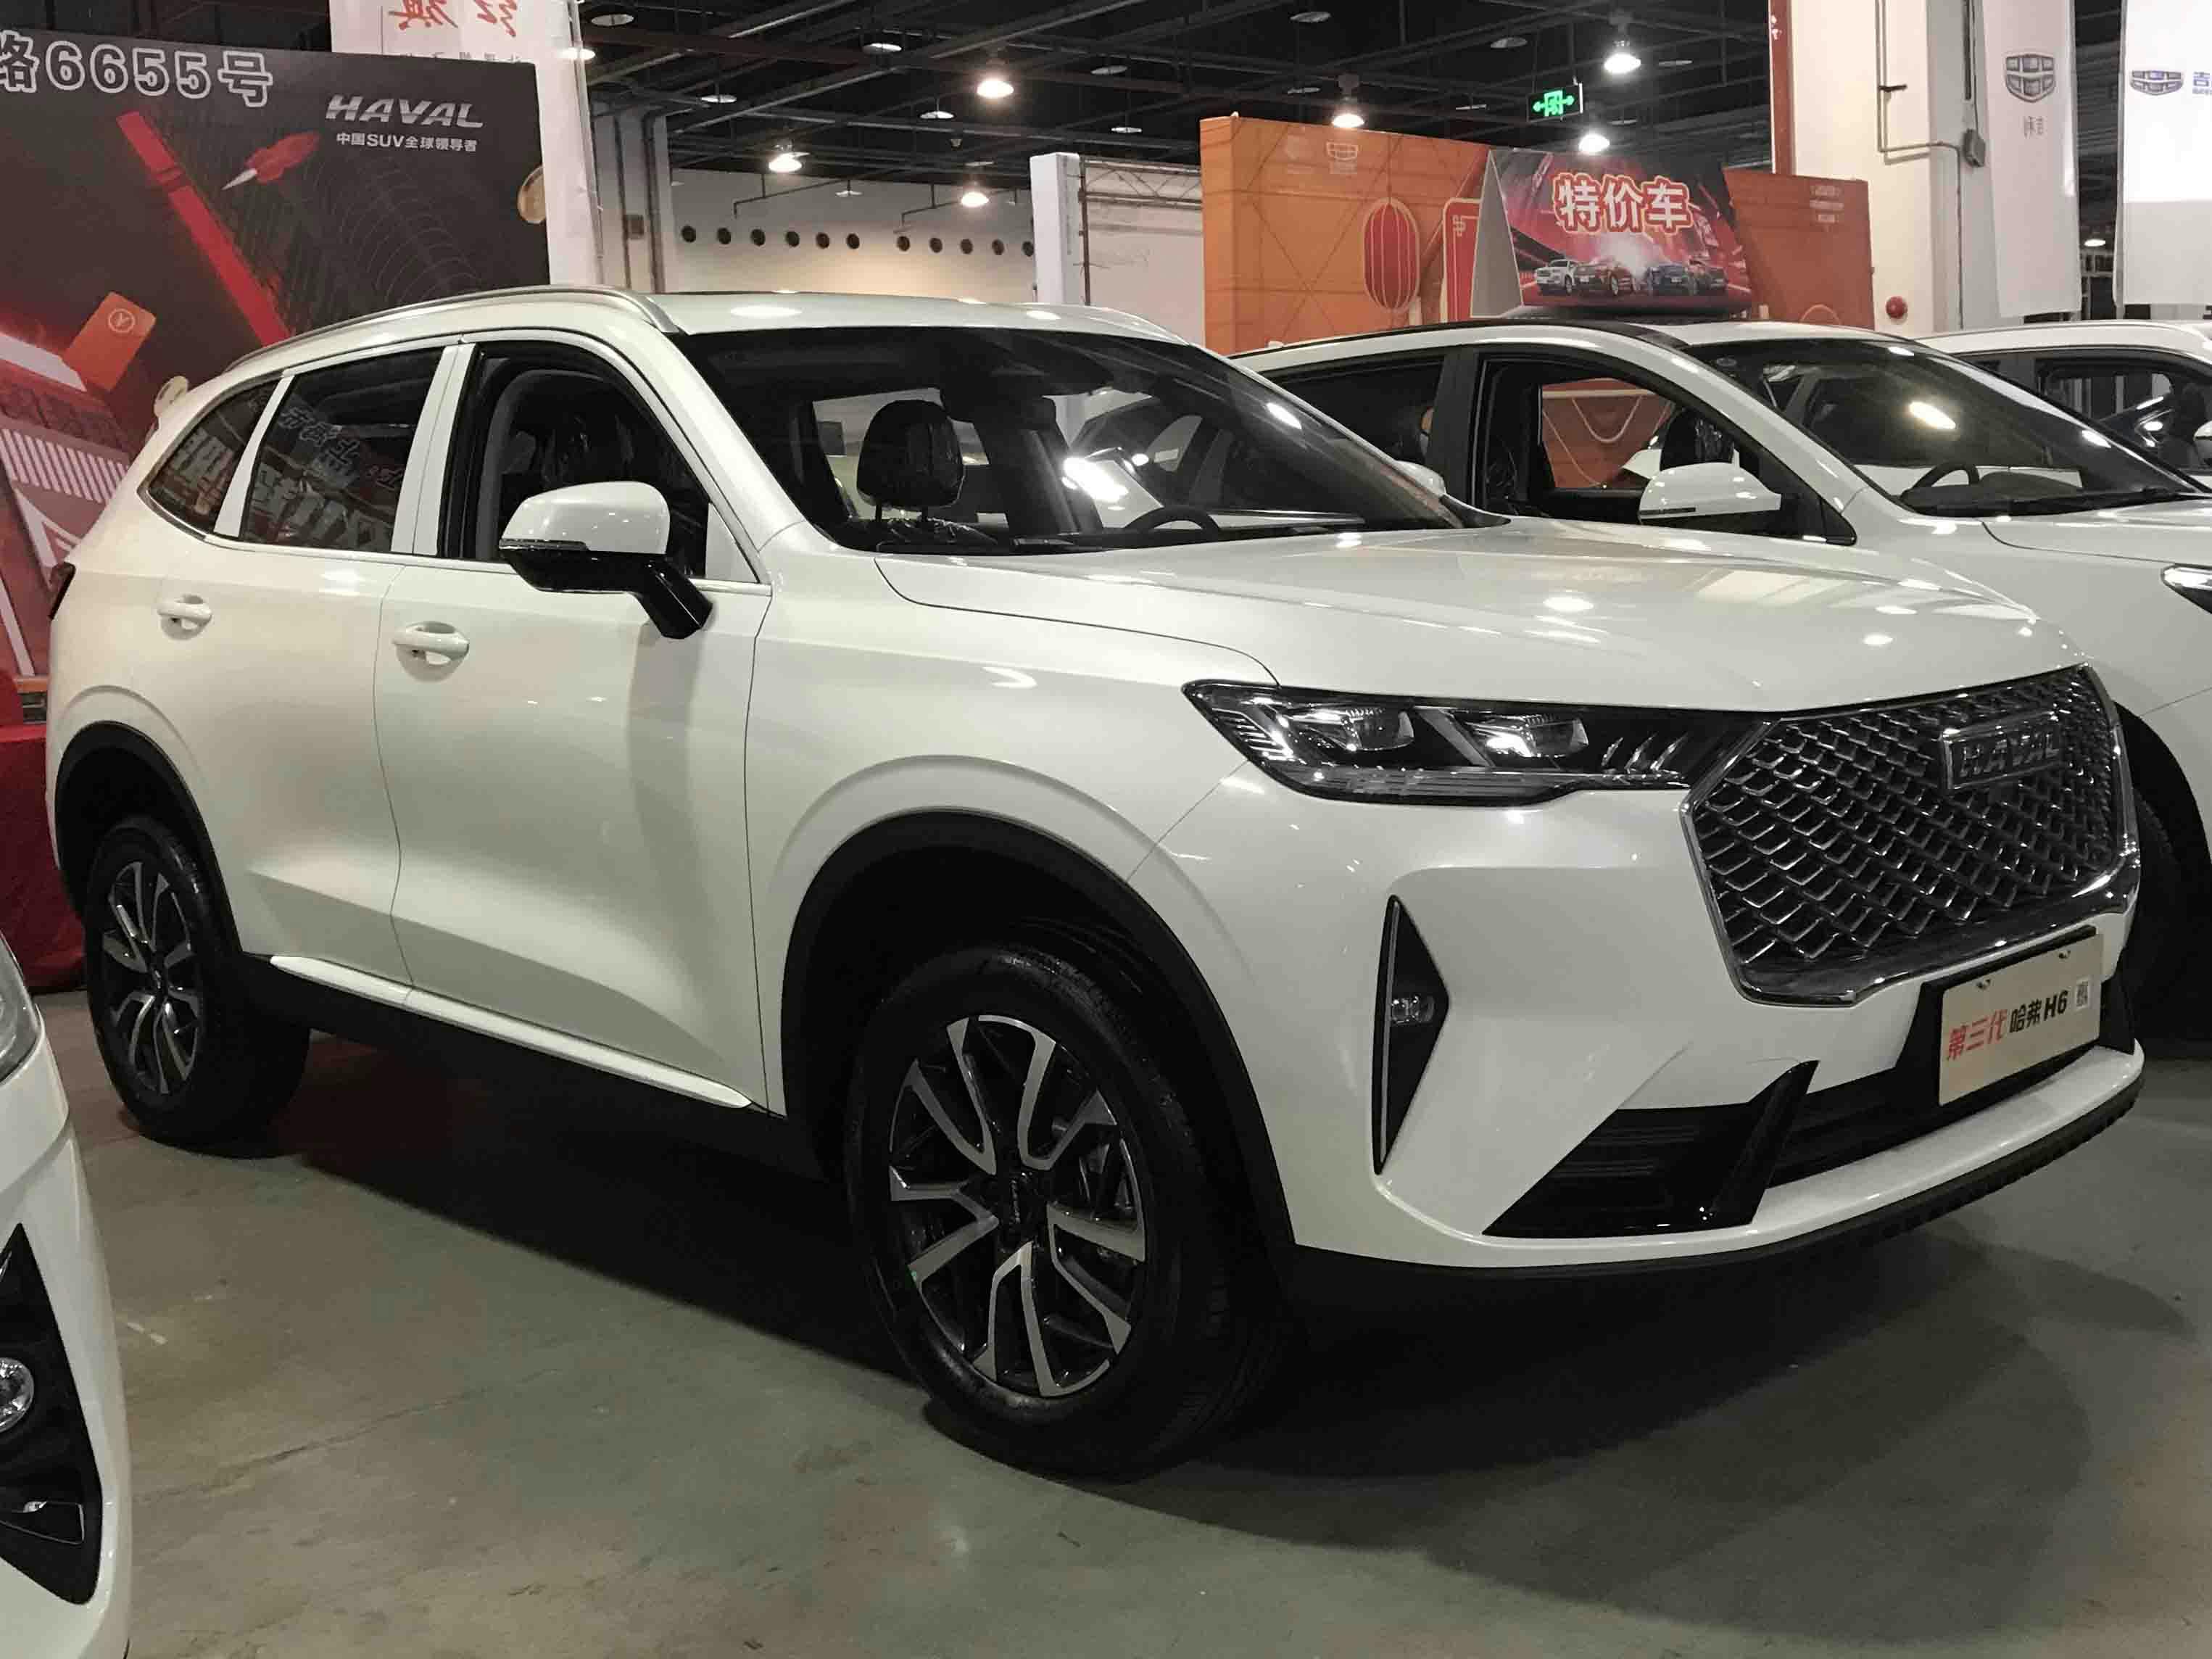 haval-has-begun-deliveries-for-the-jolion-suv